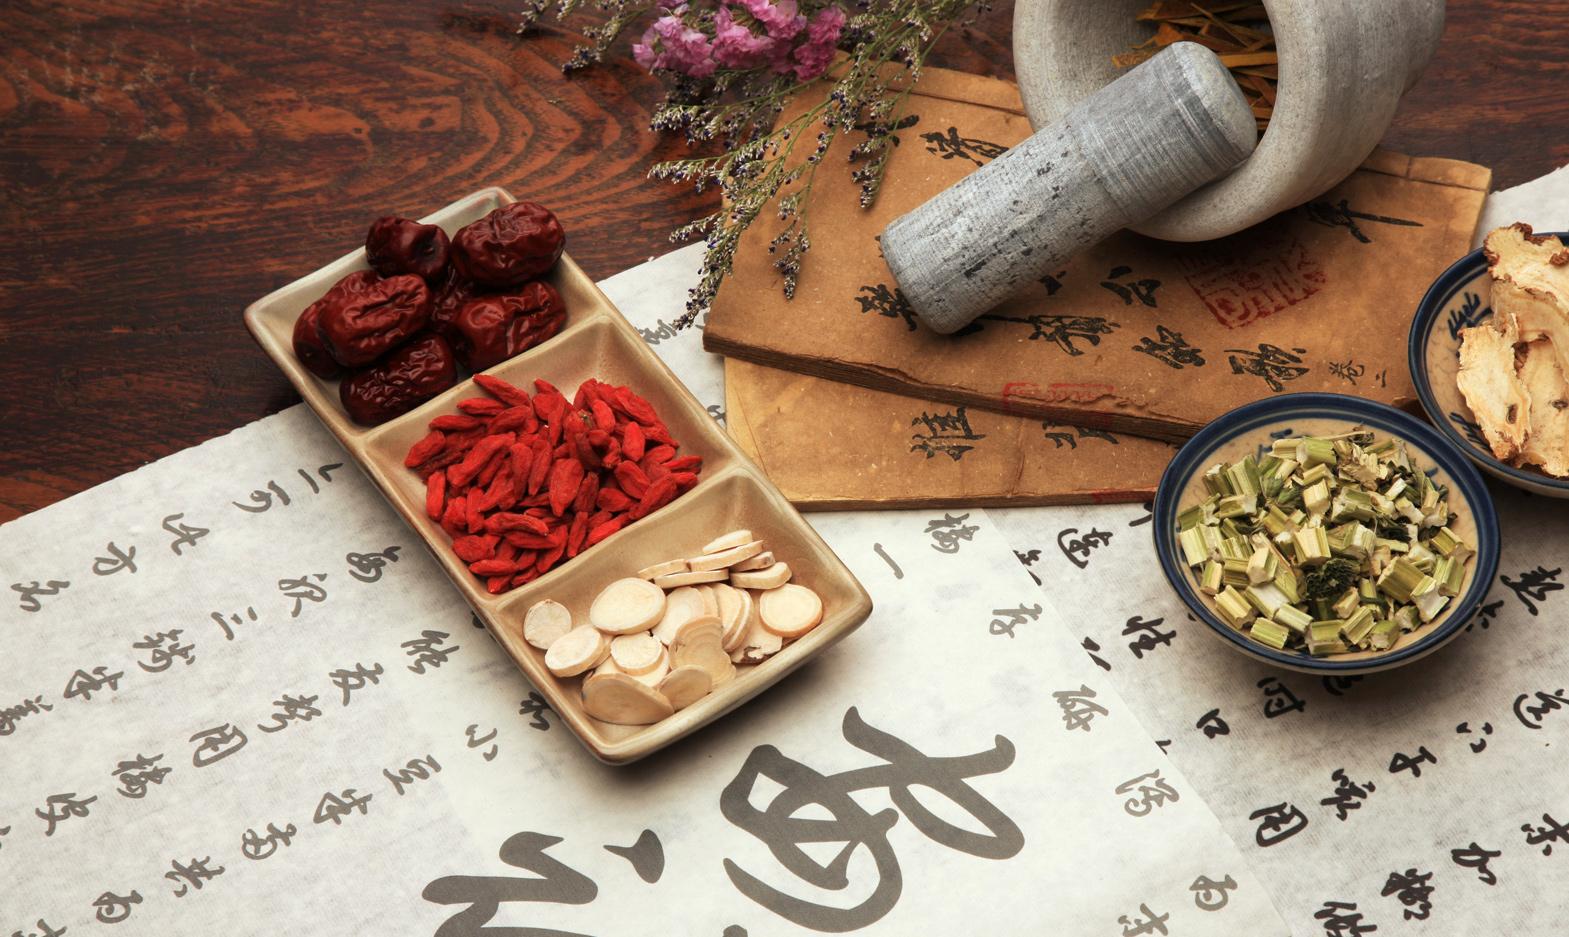 An Intro to Traditional Chinese Medicine - The Human Beauty Movement